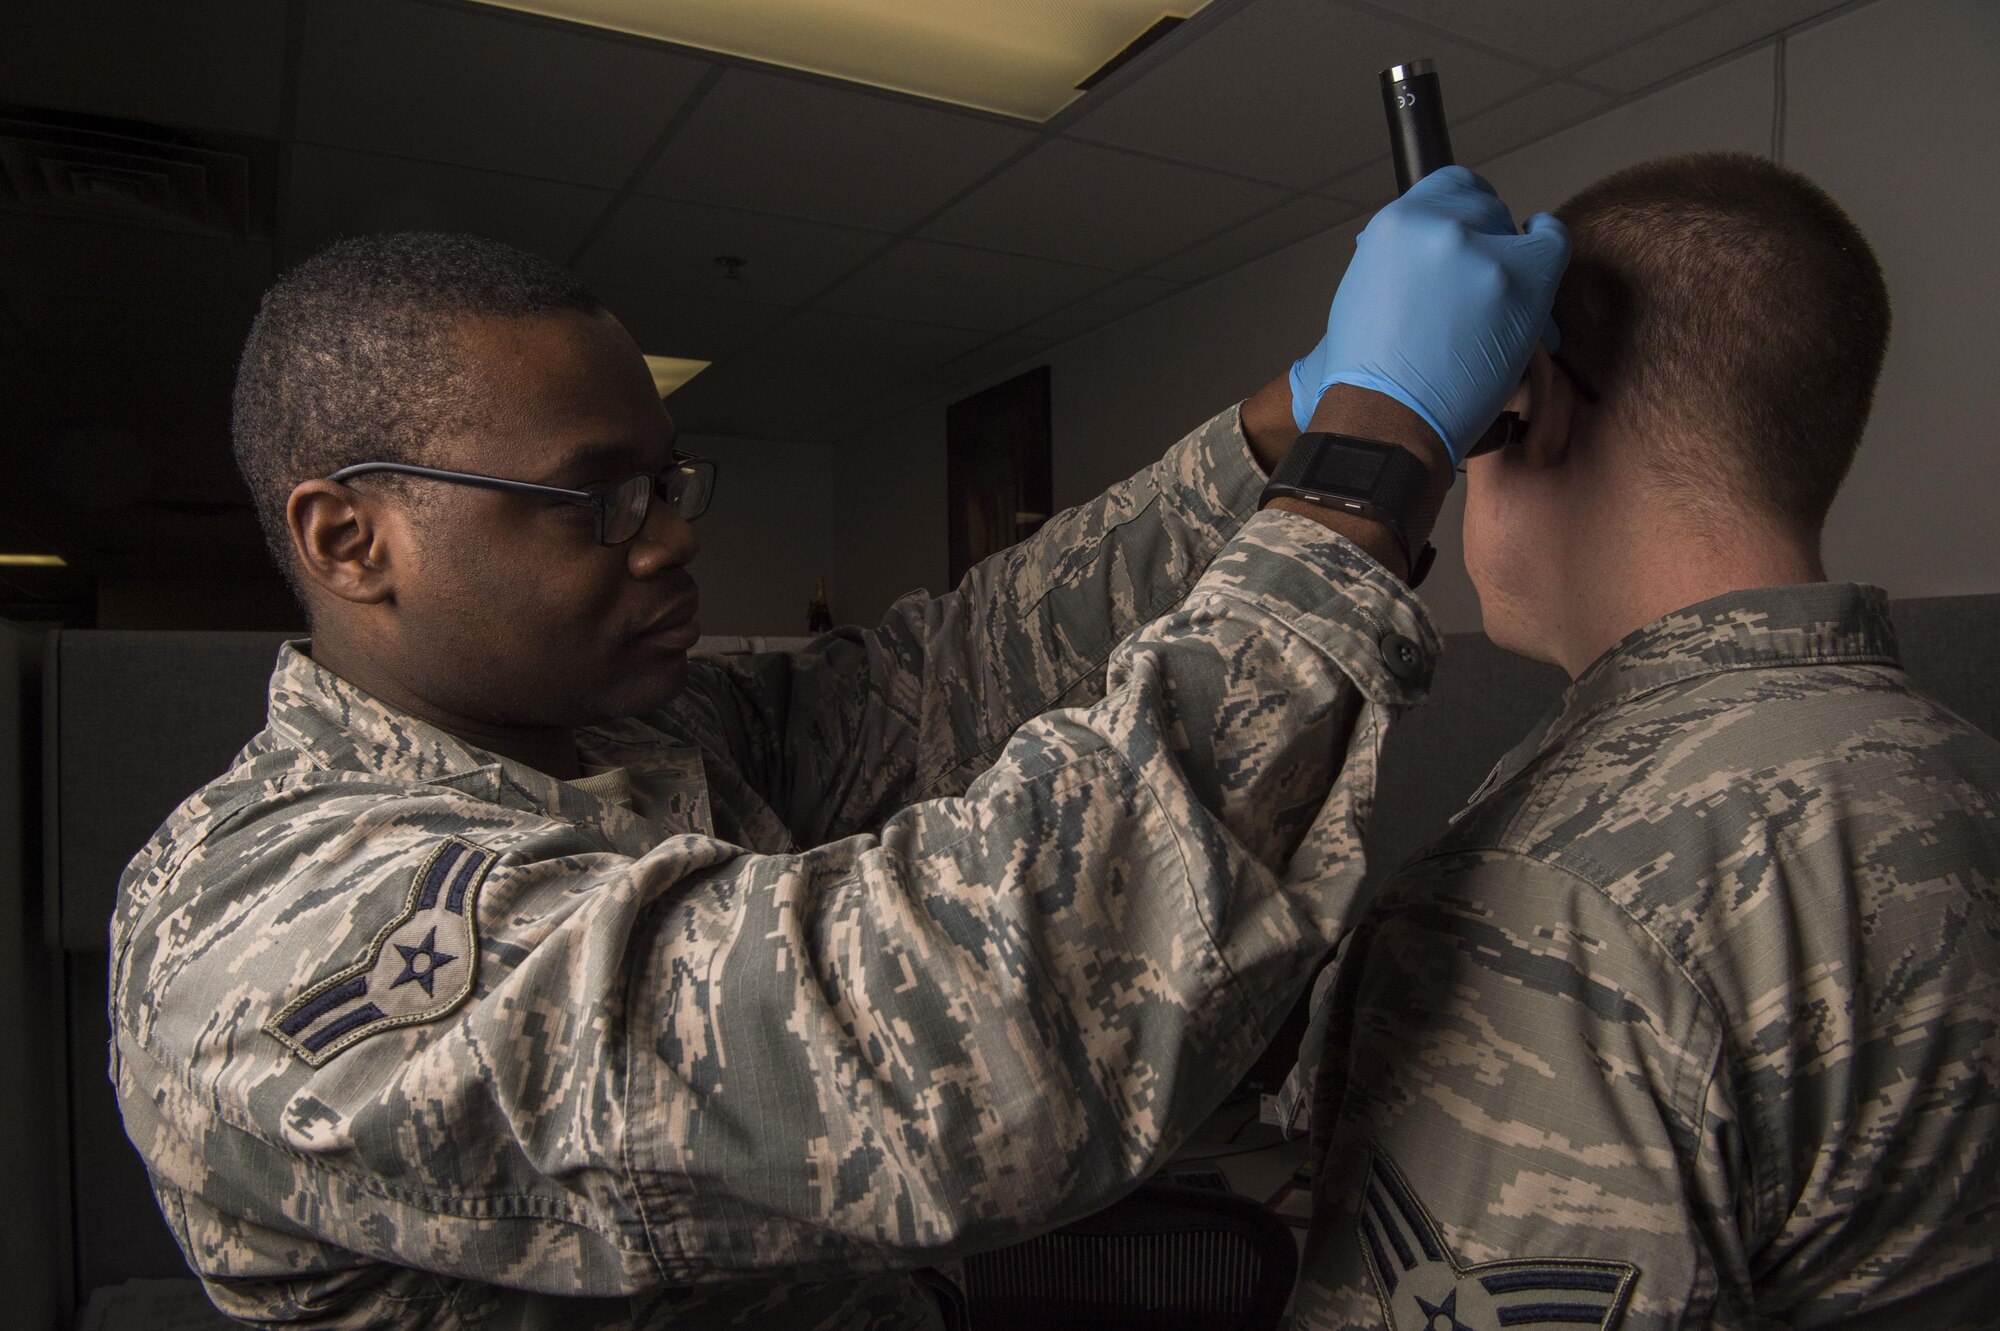 Airman 1st class Alvin Daniels, 90th Medical Operations Squadron public Health technician, performs a lighted ear inspection on a patient at F.E. Warren Air Force Base, Wyo., Jan. 20, 2017. The Air Force celebrates Biomedical Science Corps Appreciation Week Jan. 23 to 27. The Biomedical Science Corps is comprised of 15 medical Air Force Specialty Codes of which 10 are represented at F.E. Warren. (U.S. Air Force photo by Staff Sgt. Christopher Ruano)